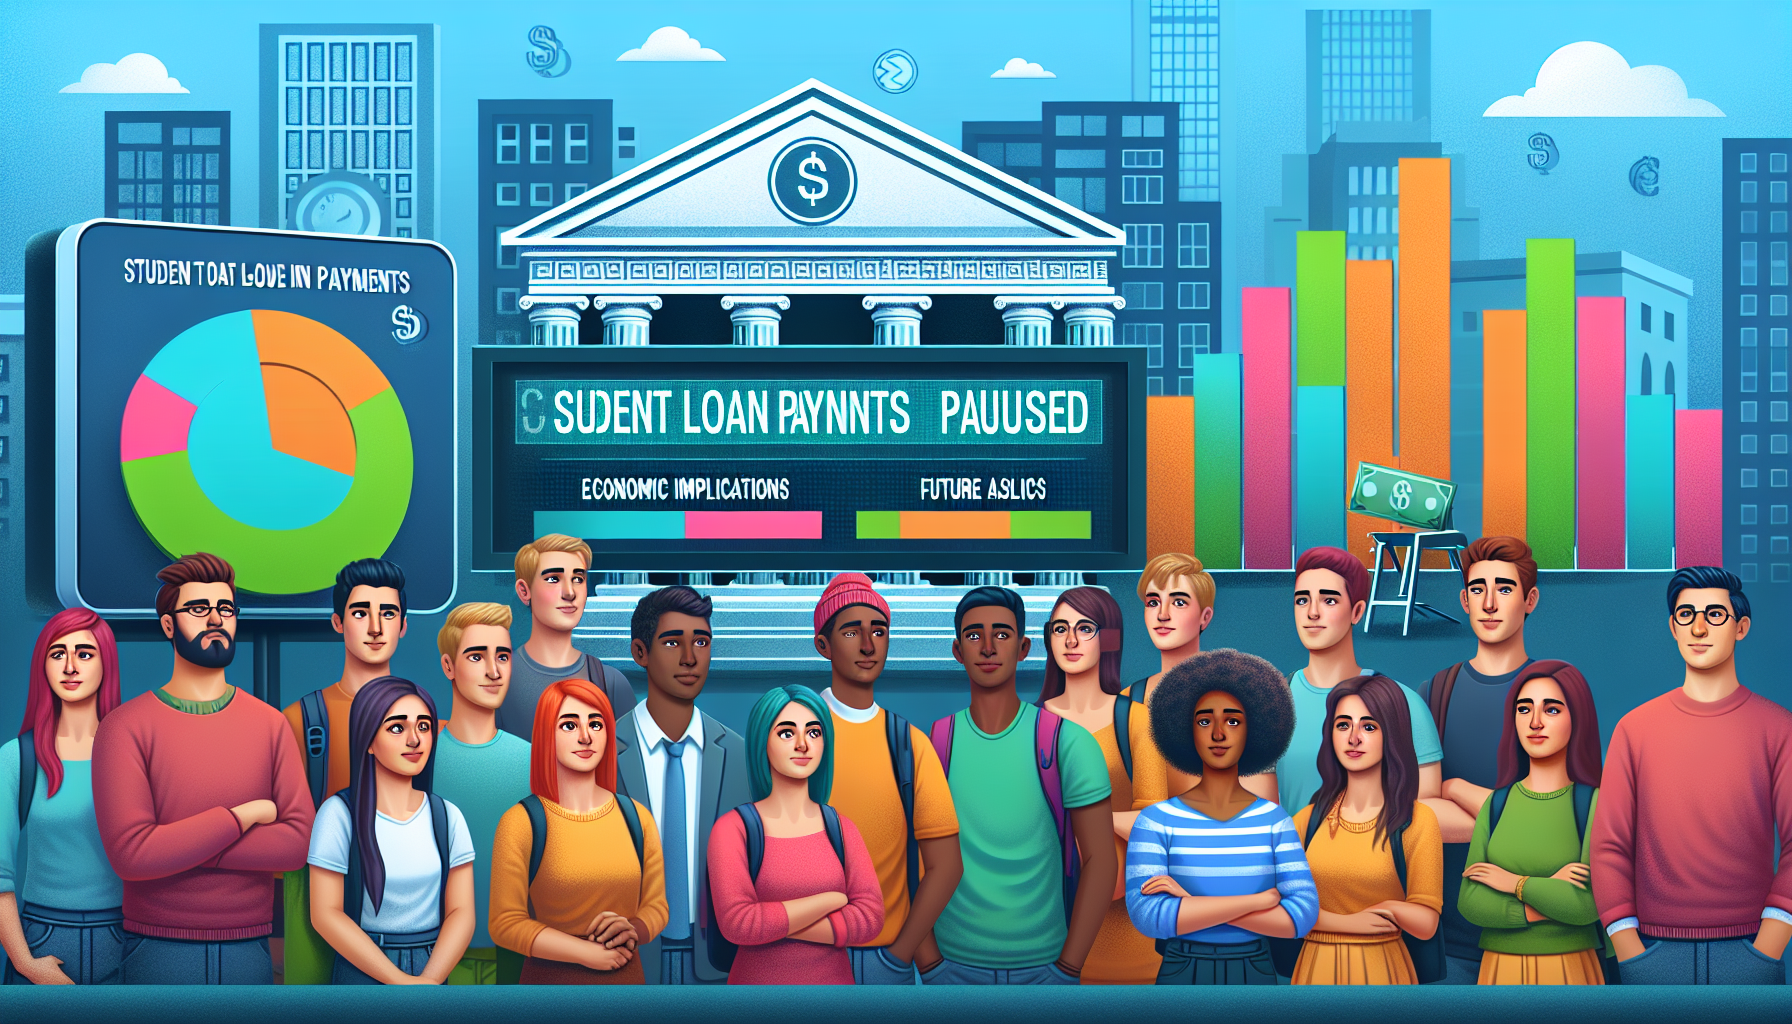 Biden's pause on student loan payments: economic implications and the future of debt in America